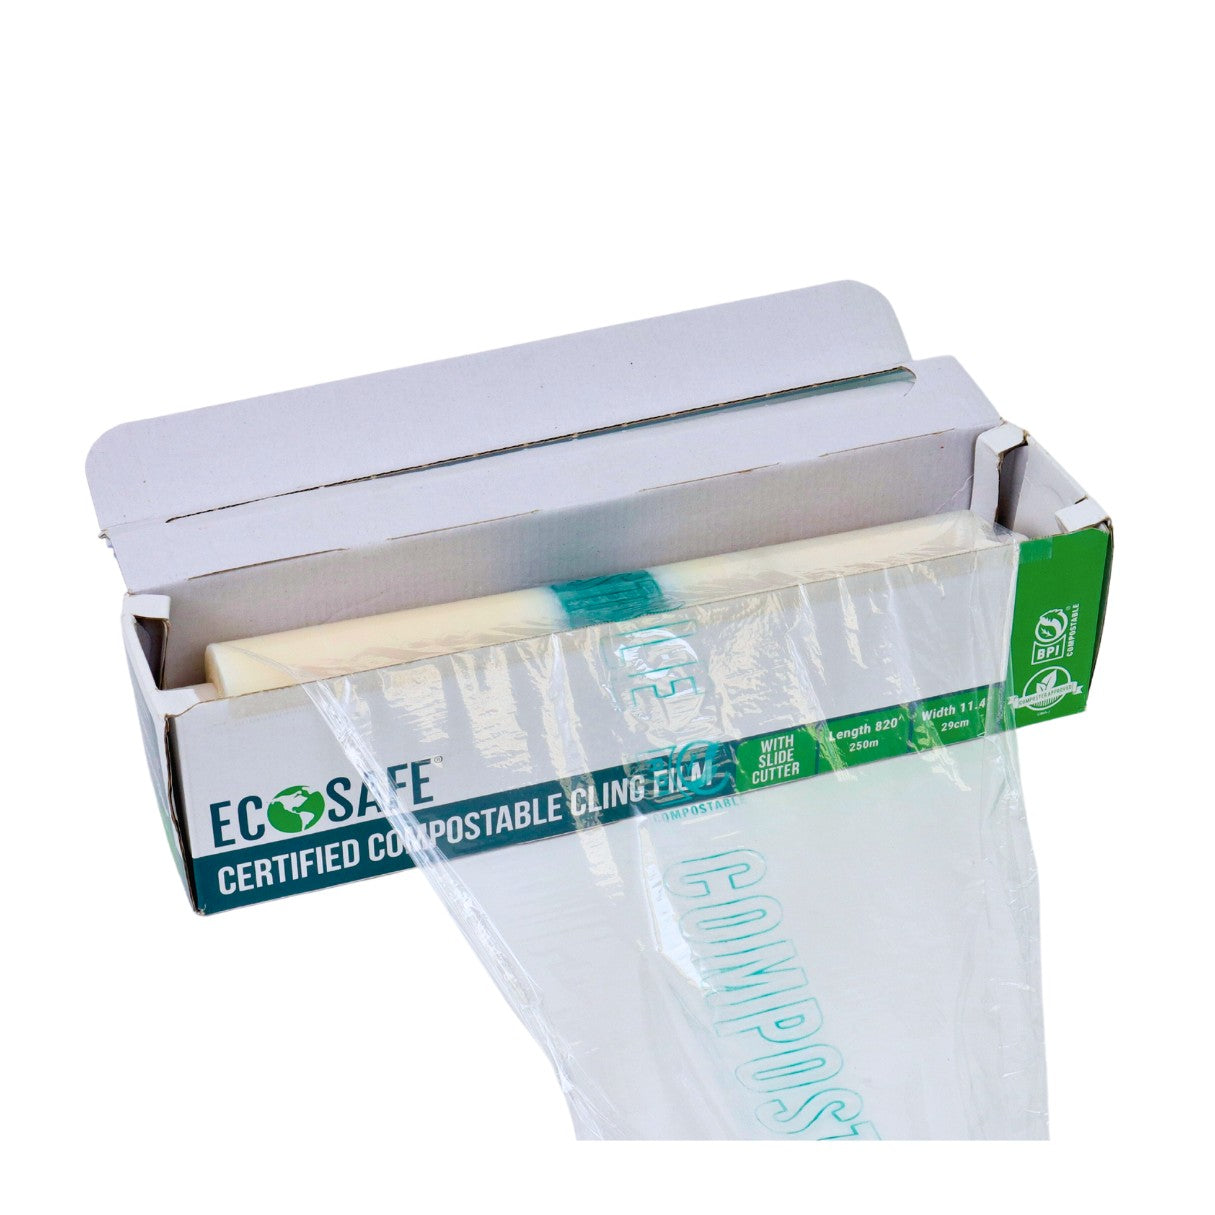 Compostable Cling Wrap | Clear | Made by EcoSafe® (4 Rolls=4 Boxes)